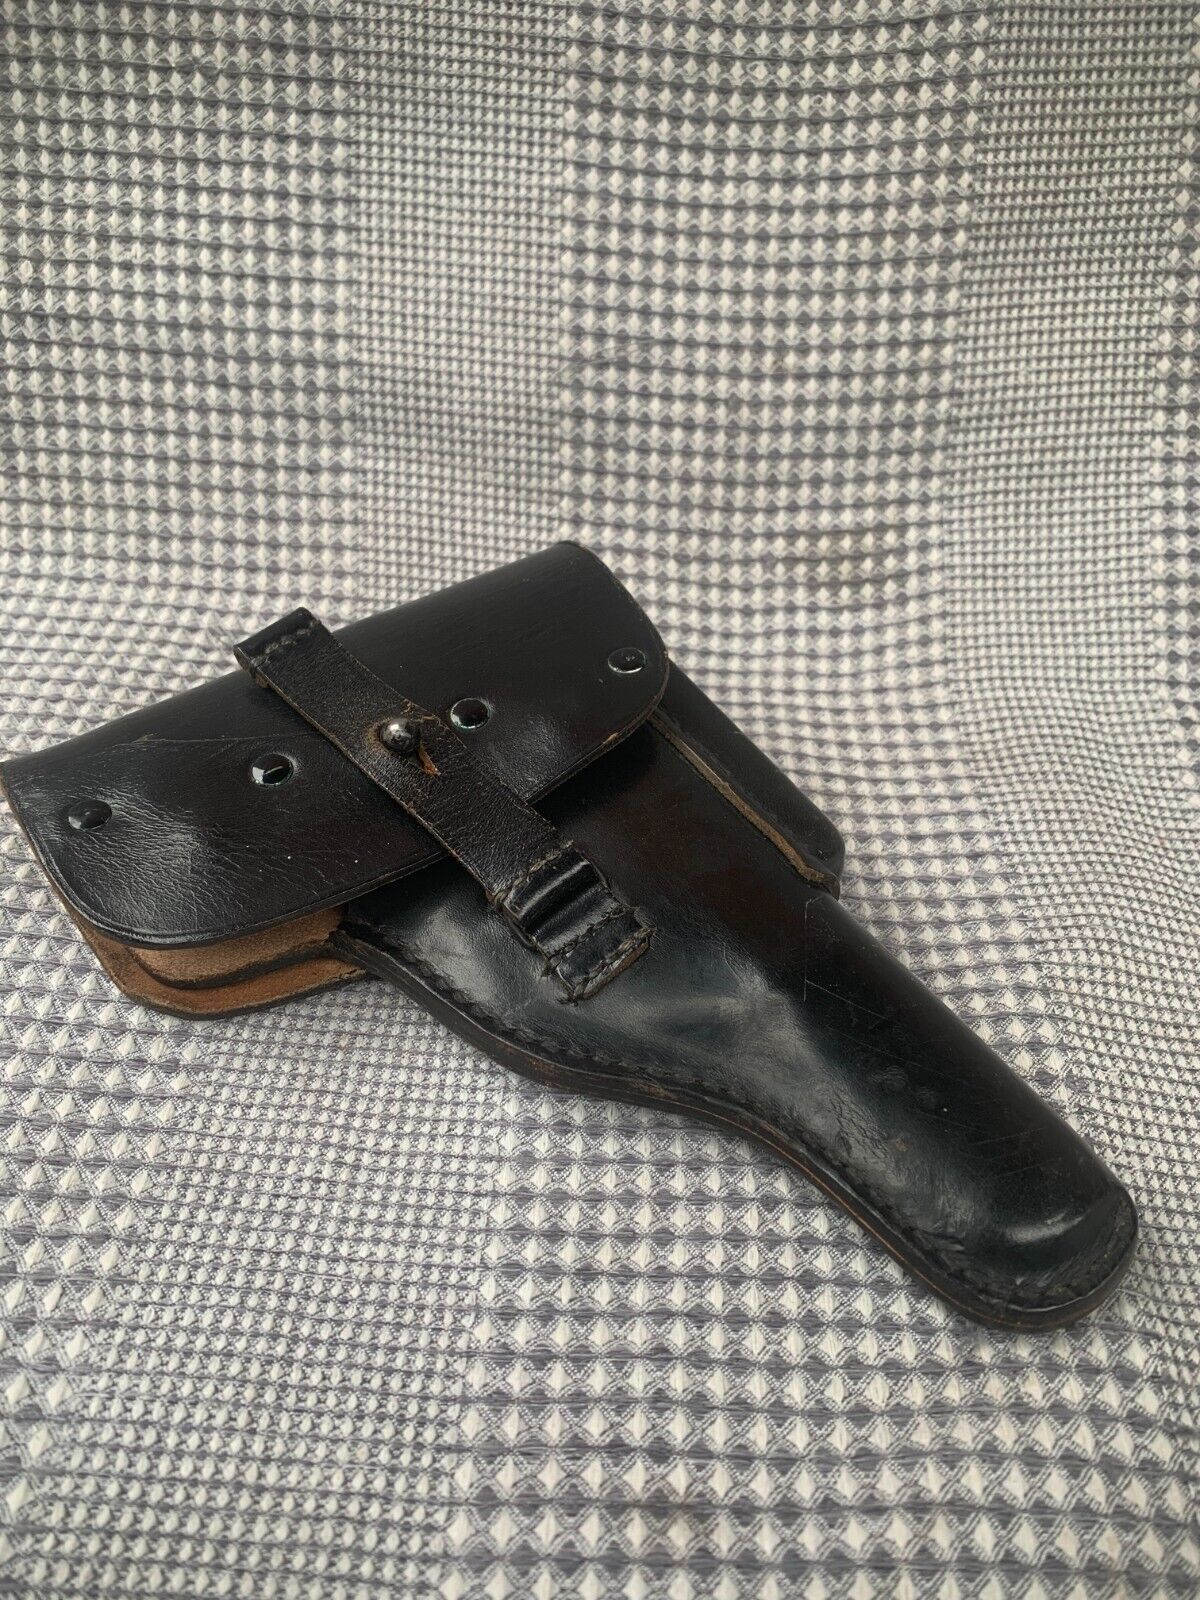 Holster for Walter. WWII WW2